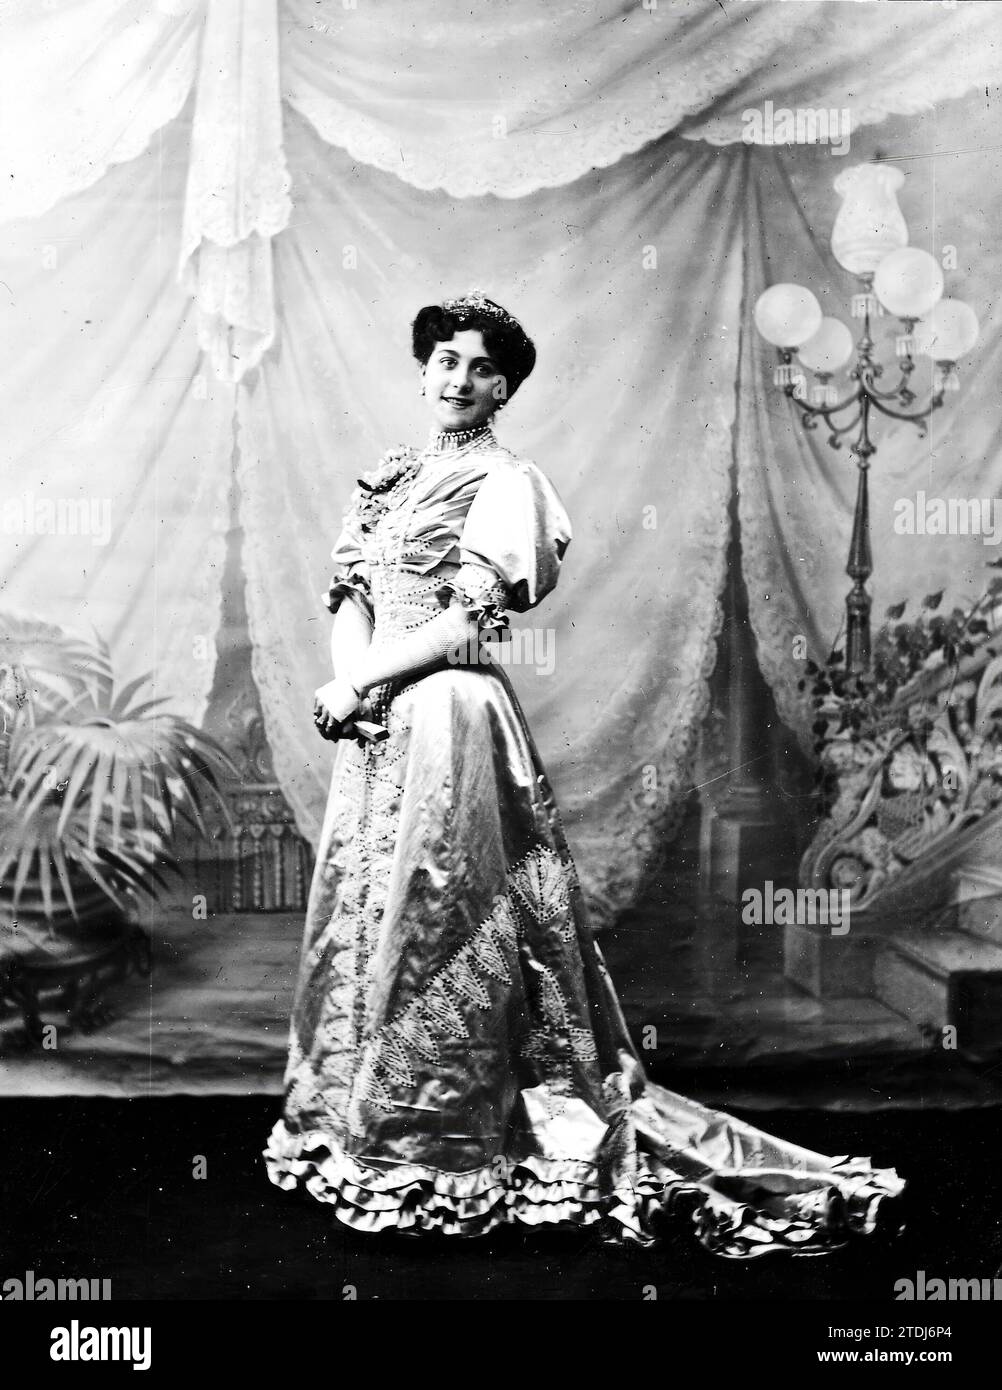 04/30/1909. Photo by Barrera. The Distinguished Tiple Candida Suarez, whose wedding with the right-handed cockerel will be Verified shortly. Credit: Album / Archivo ABC Stock Photo